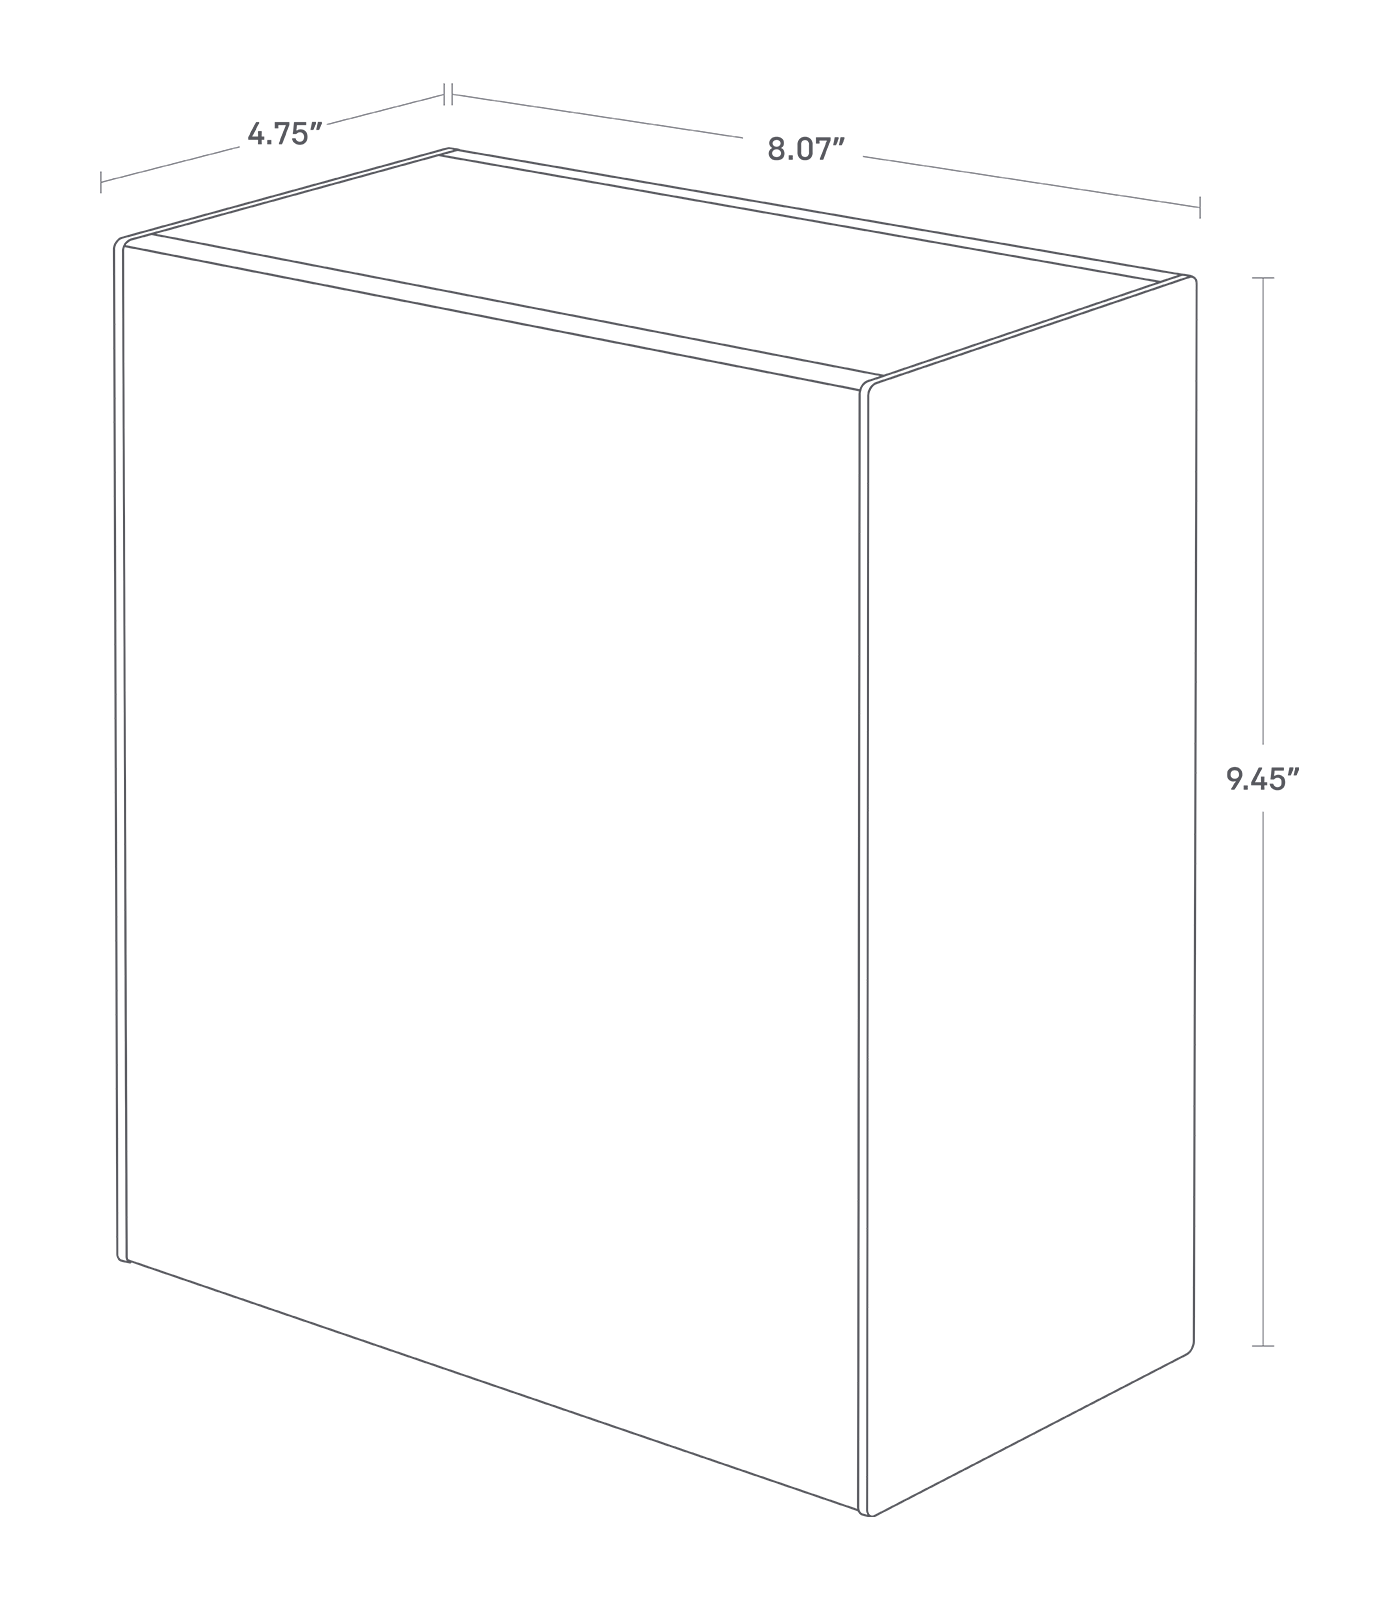 Dimension image for Wall-Mounted Storage or Trash Bin on a white background including dimensions  L 9.13 x W 8.07 x H 9.45 inches